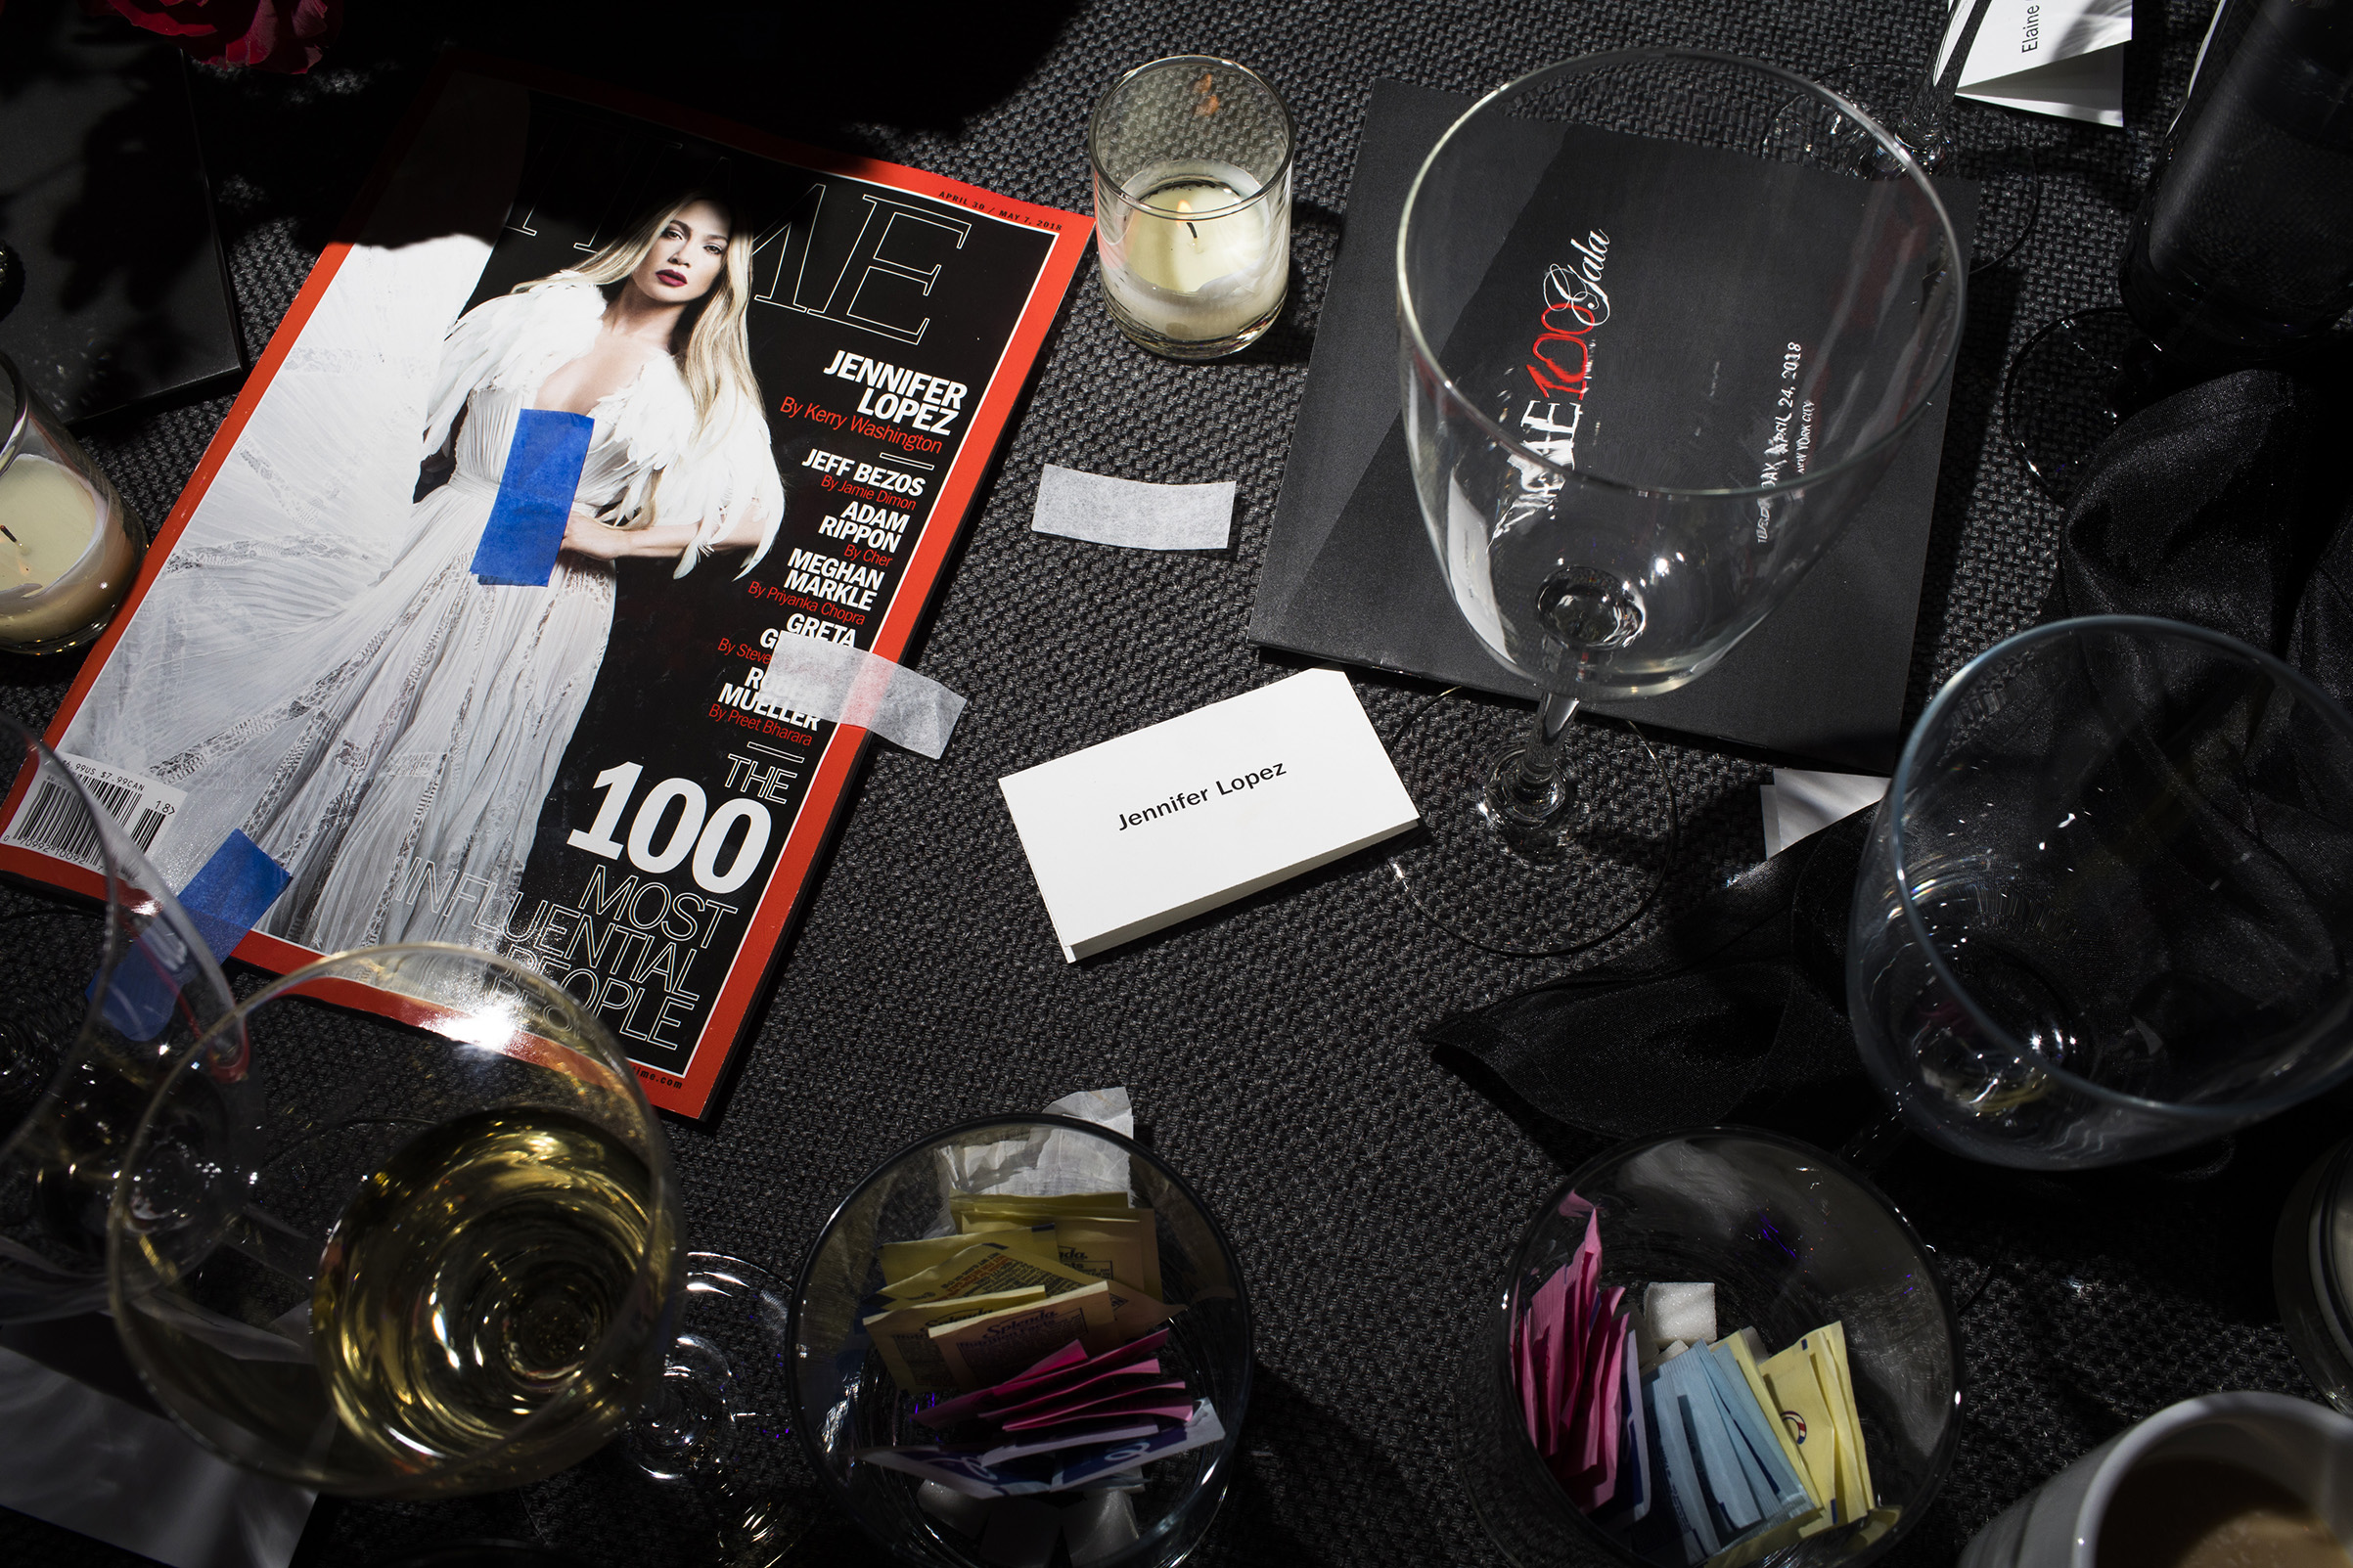 A table setting at the Time 100 Gala at Jazz at Lincoln Center on April 24, 2018 in New York City. (Landon Nordeman for TIME)